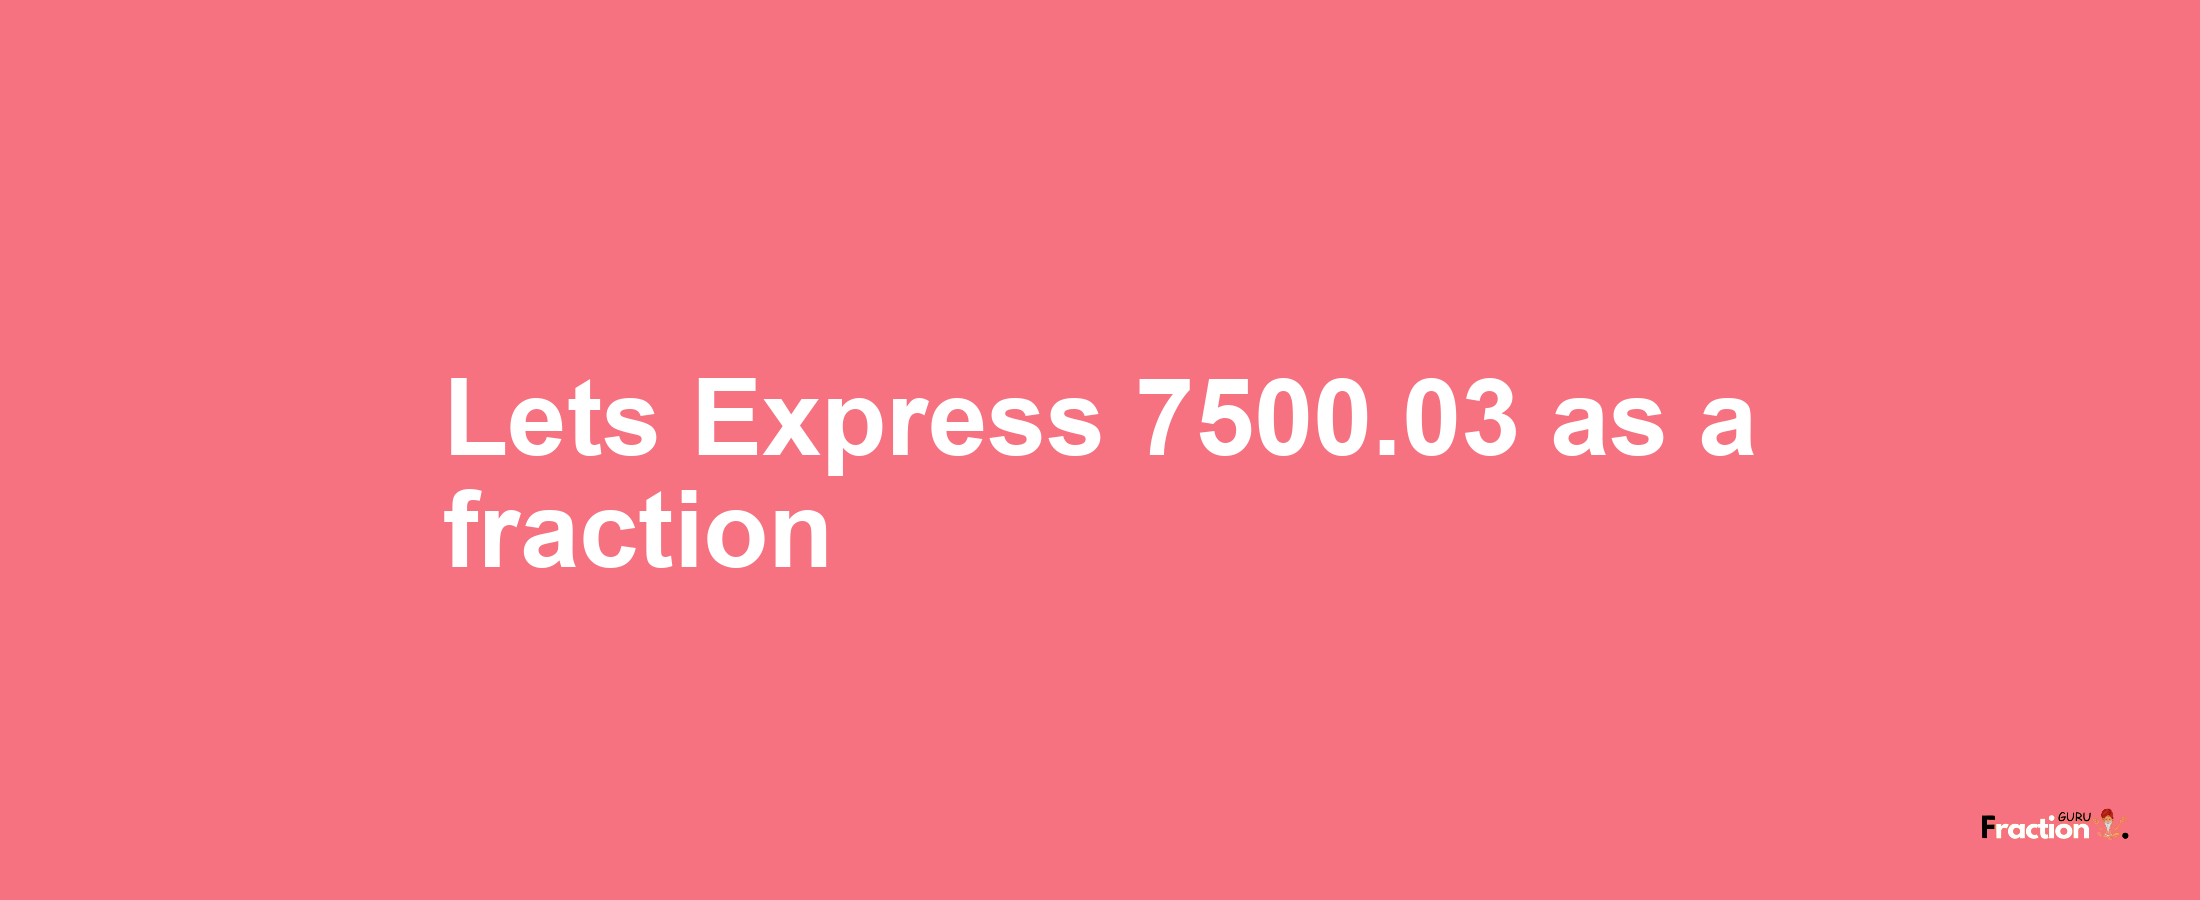 Lets Express 7500.03 as afraction